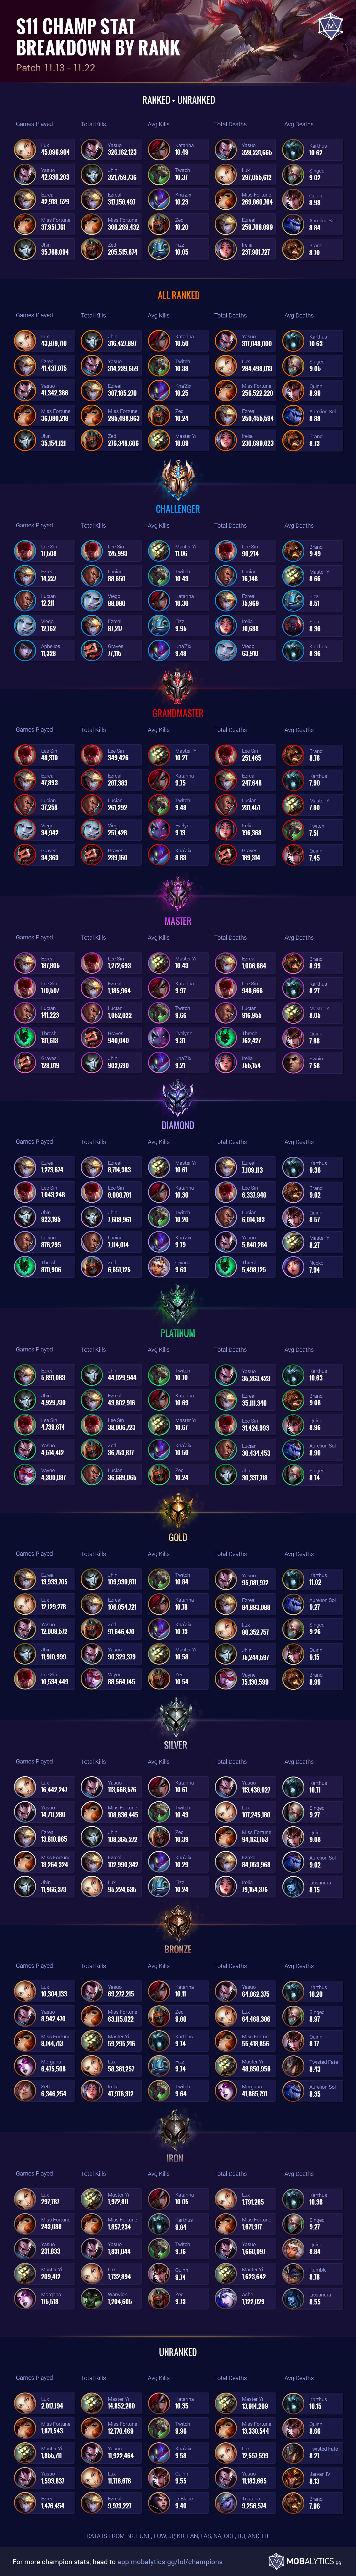 Season 11 Champion Stats Rewind: Most Kills, Deaths, and More By Rank